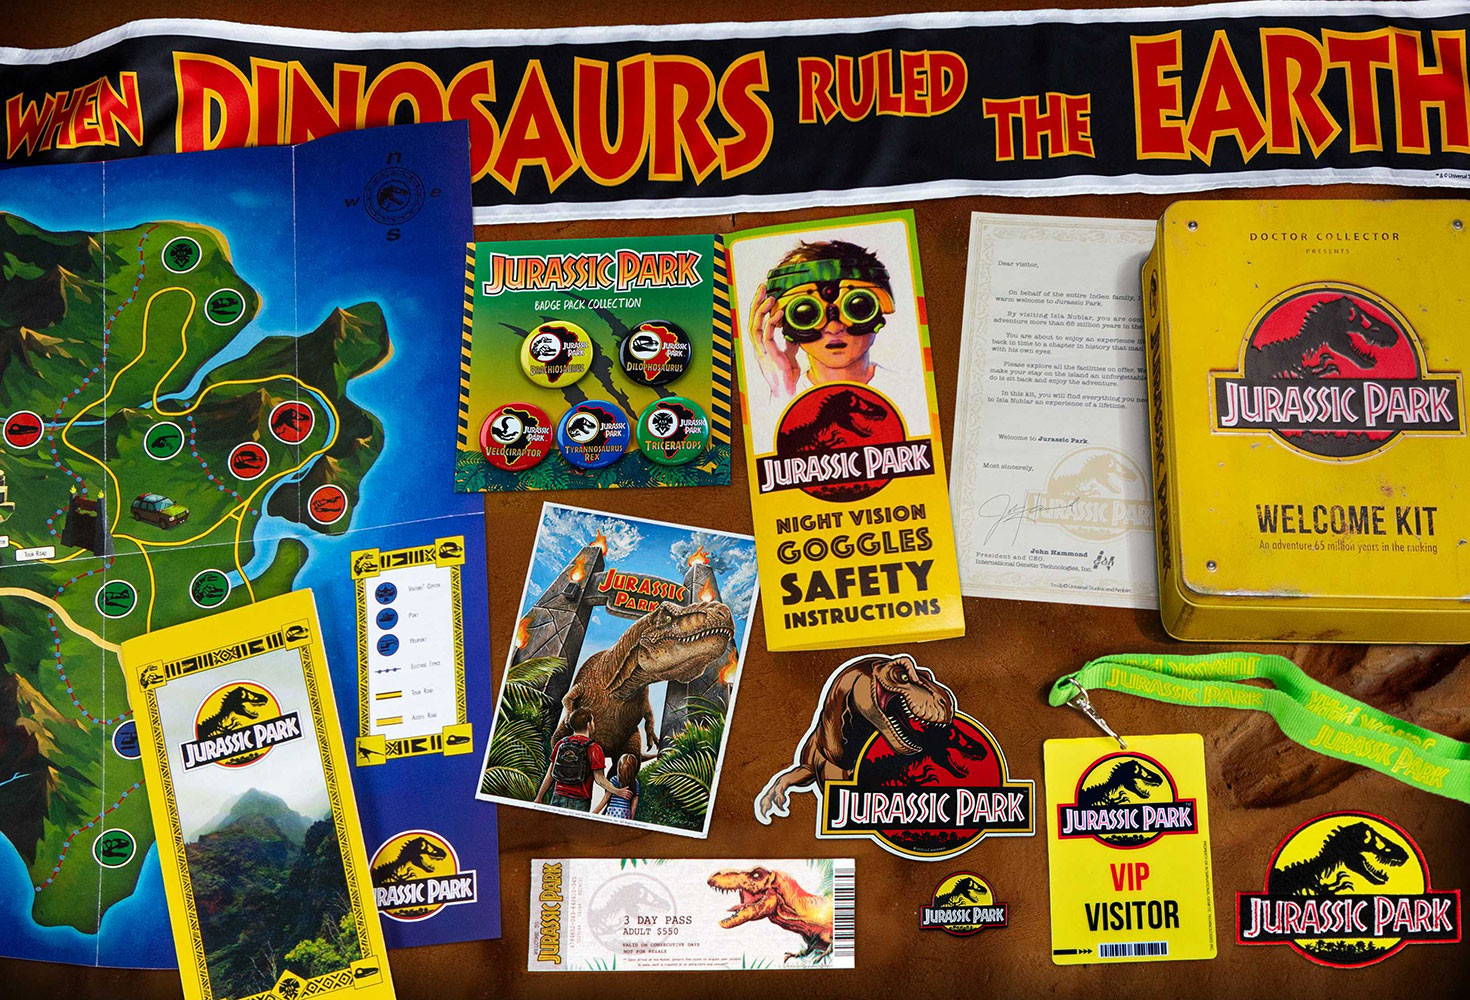 Jurassic Park Welcome Kit (Standard Edition) View 11